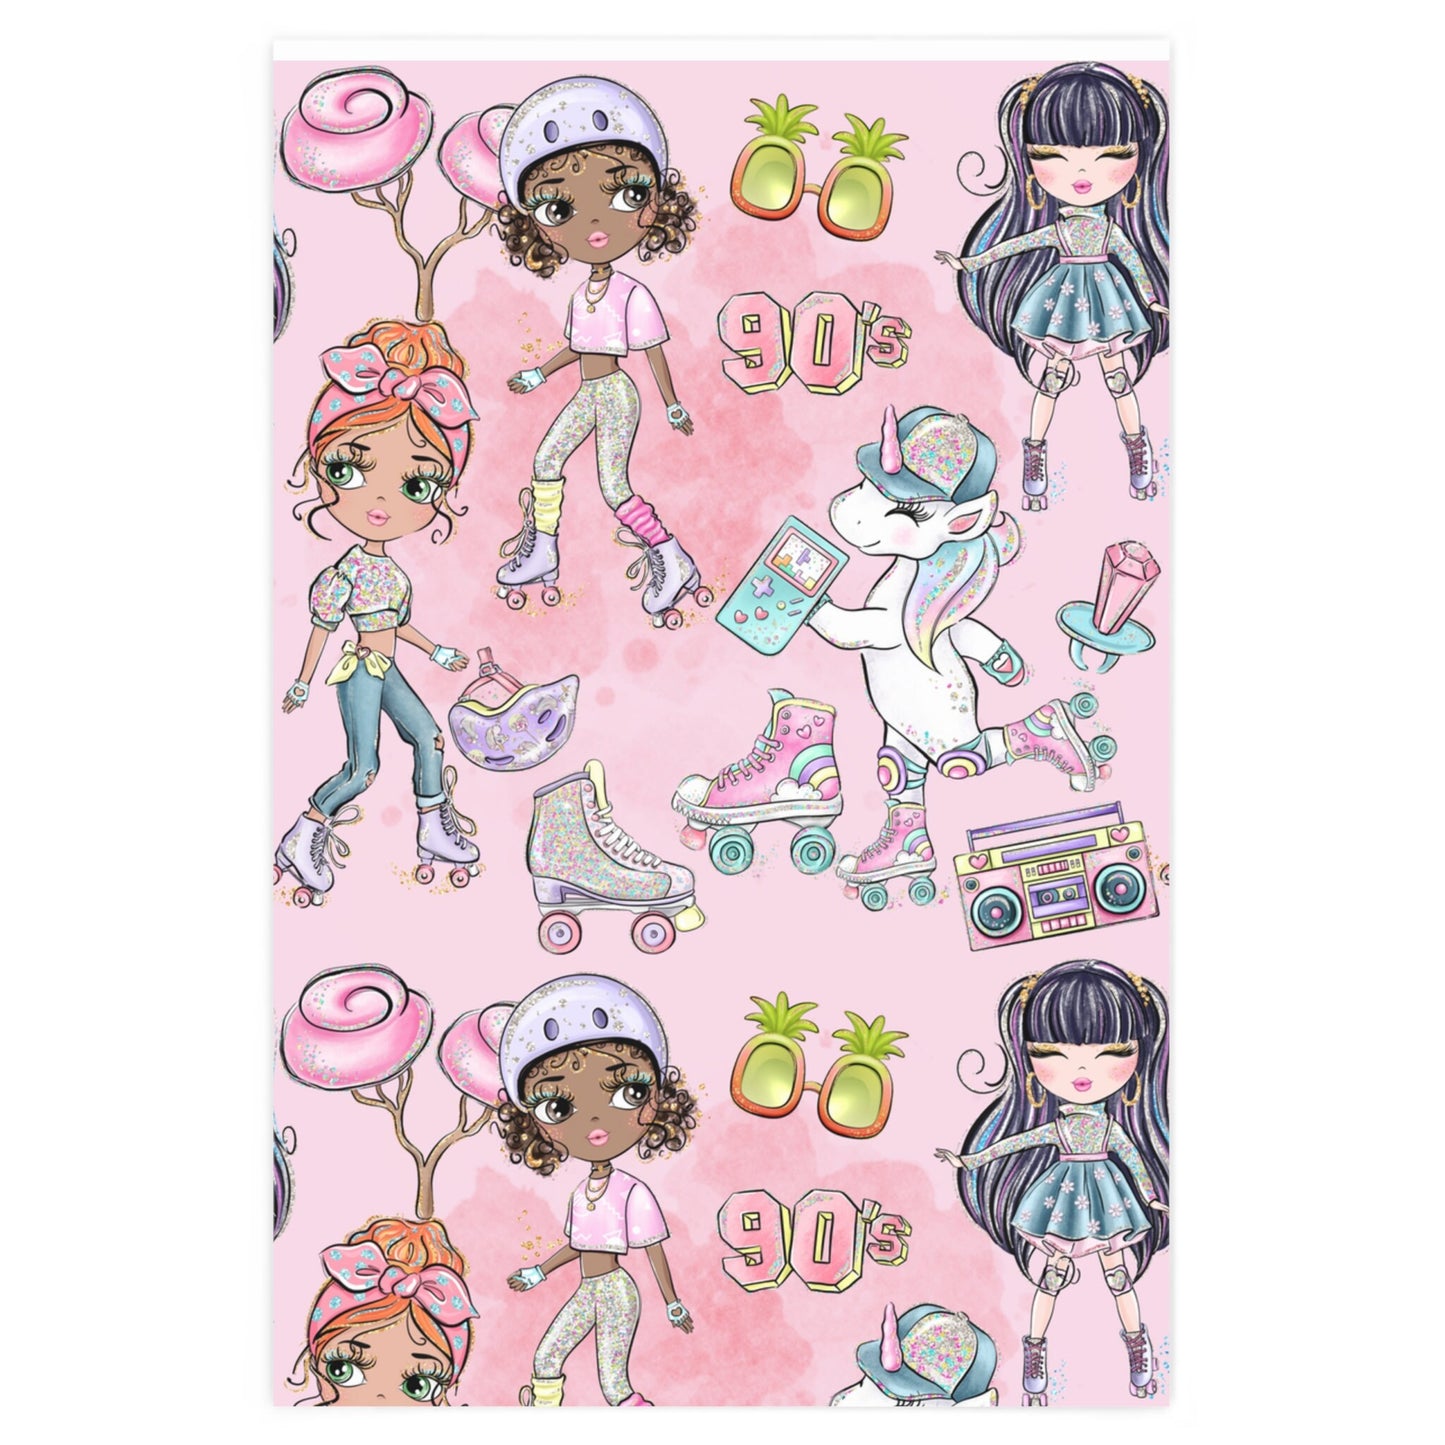 Roller Skate Retro Vibes Birthday Gift Wrapping Paper, Skating Pattern Paper, Roller Rink Party Pink Gift Wrap Paper, Unicorn Black Girl